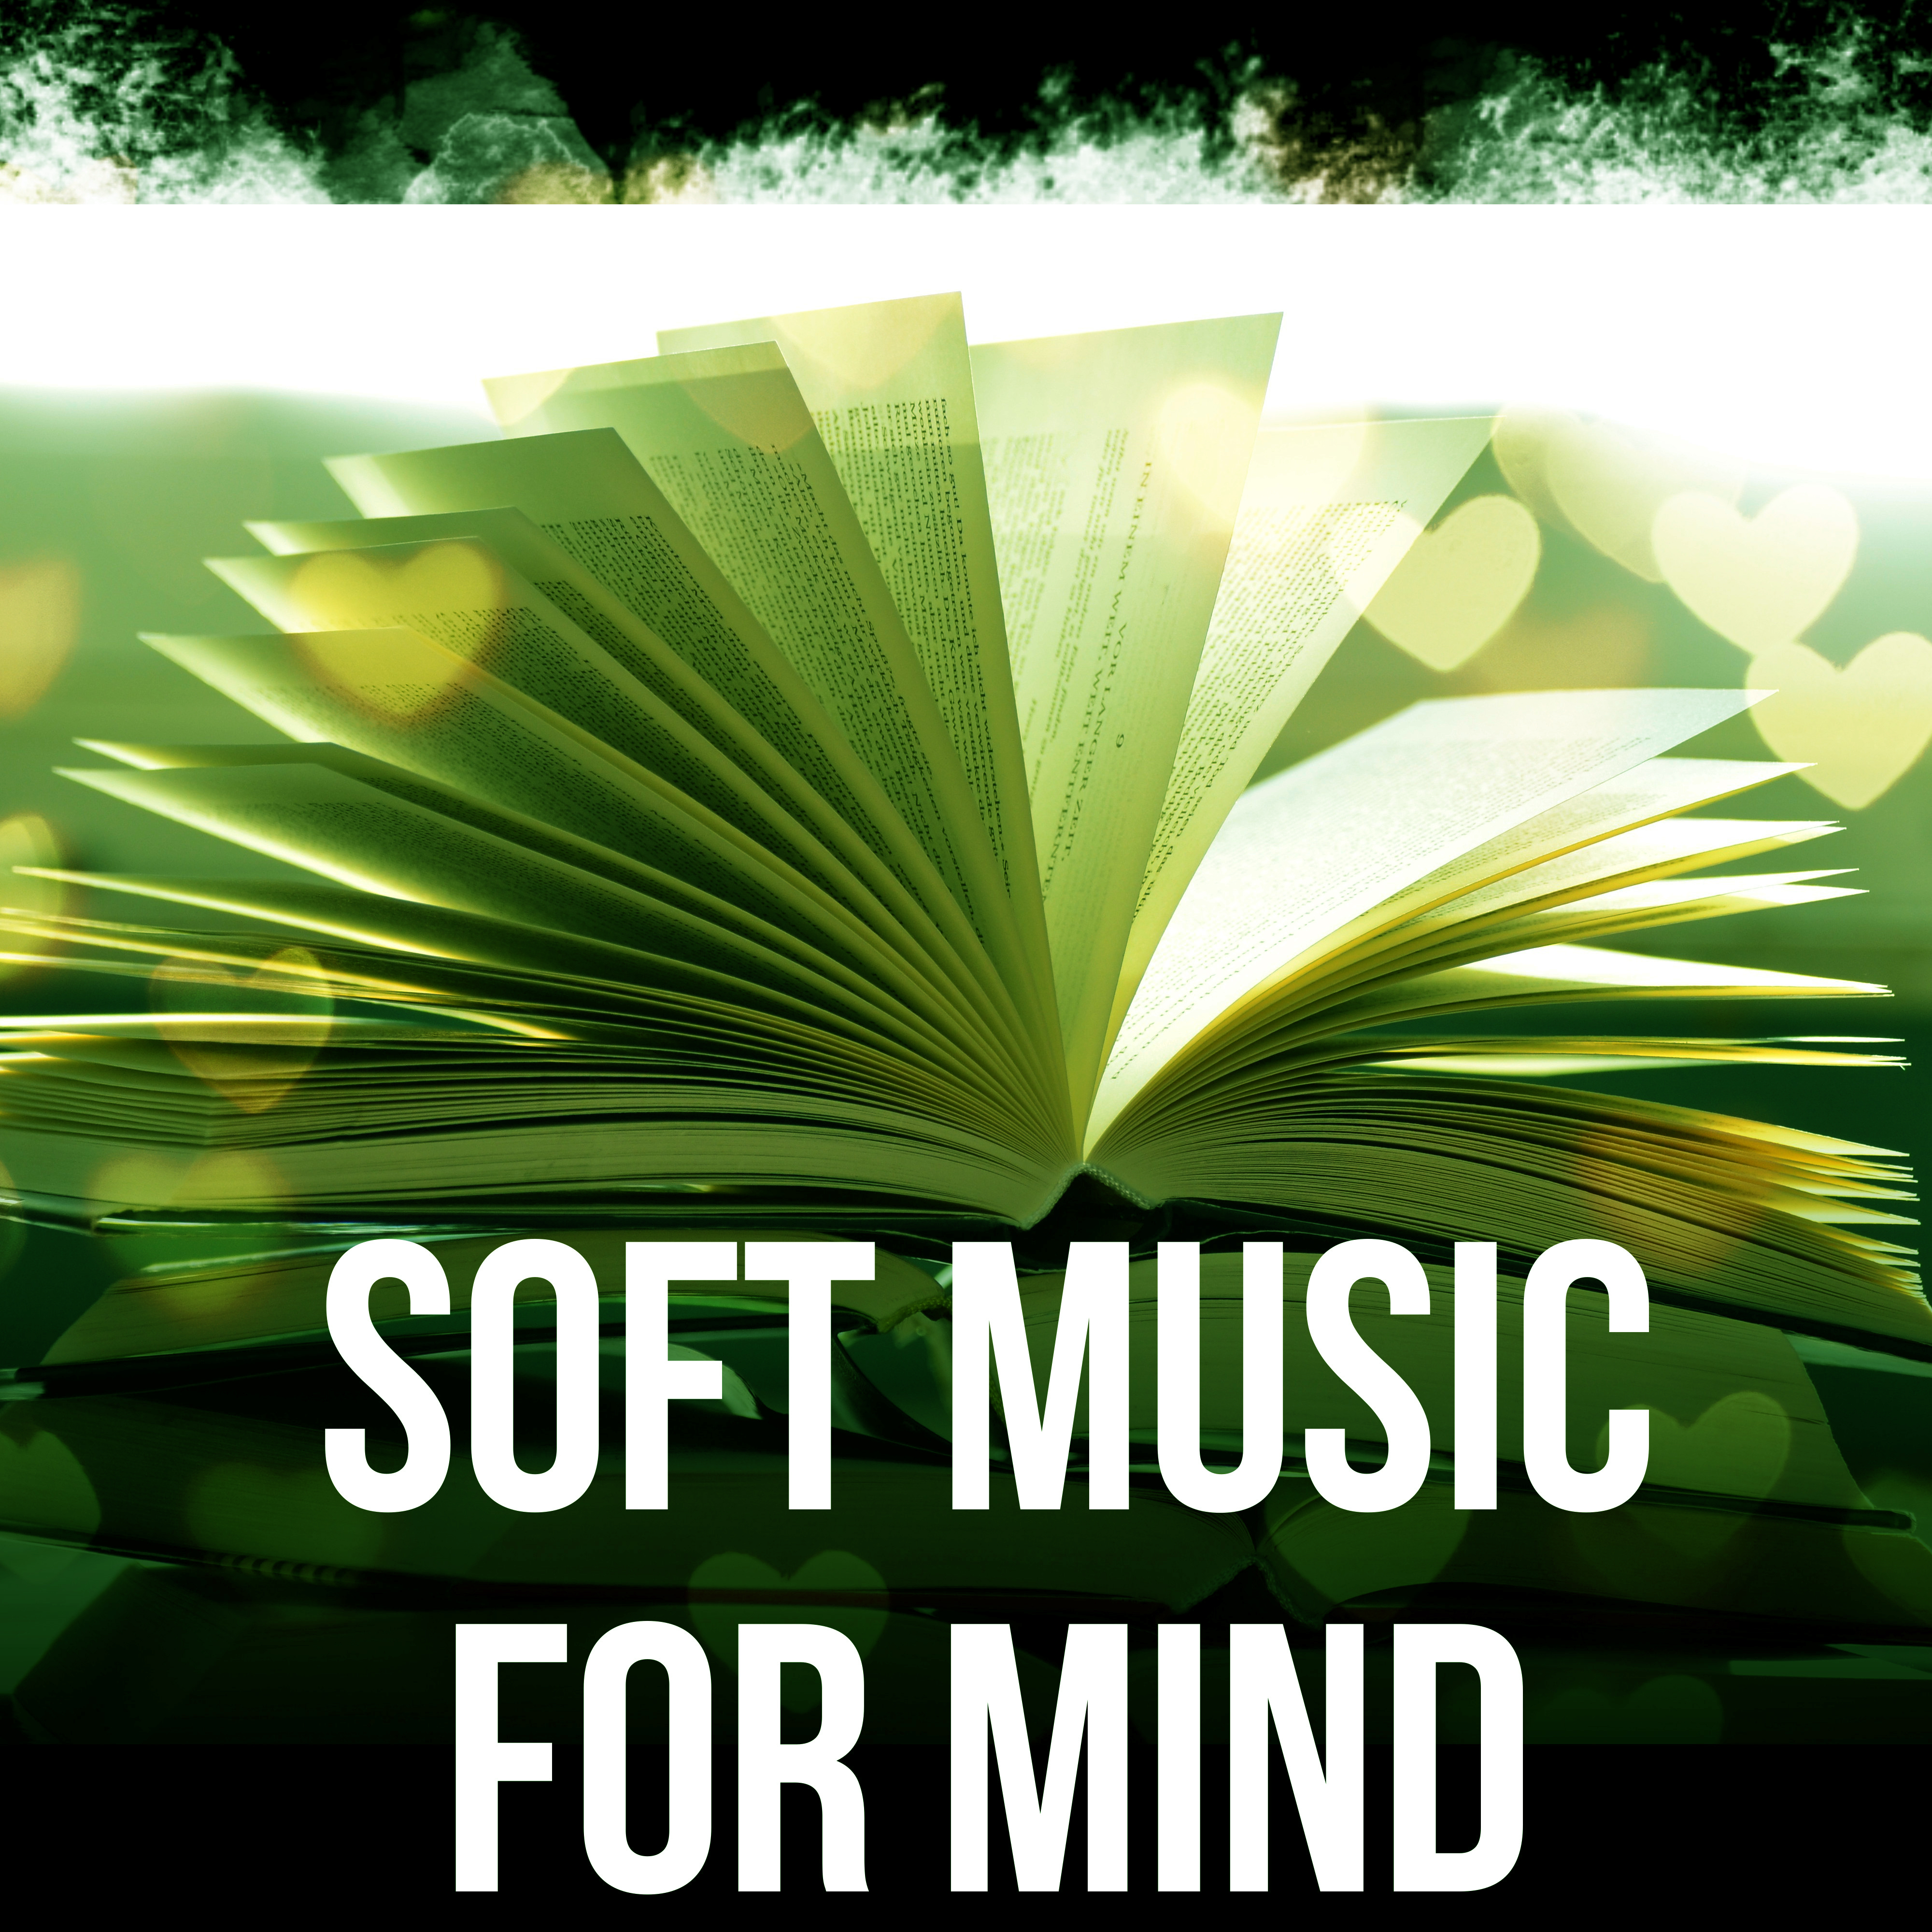 Soft Music for Mind  Music for Study, Focus  Concentration, Easy Learning, Study Music Playlist, Train Your Brain with Instrumental Music to Improve Memory